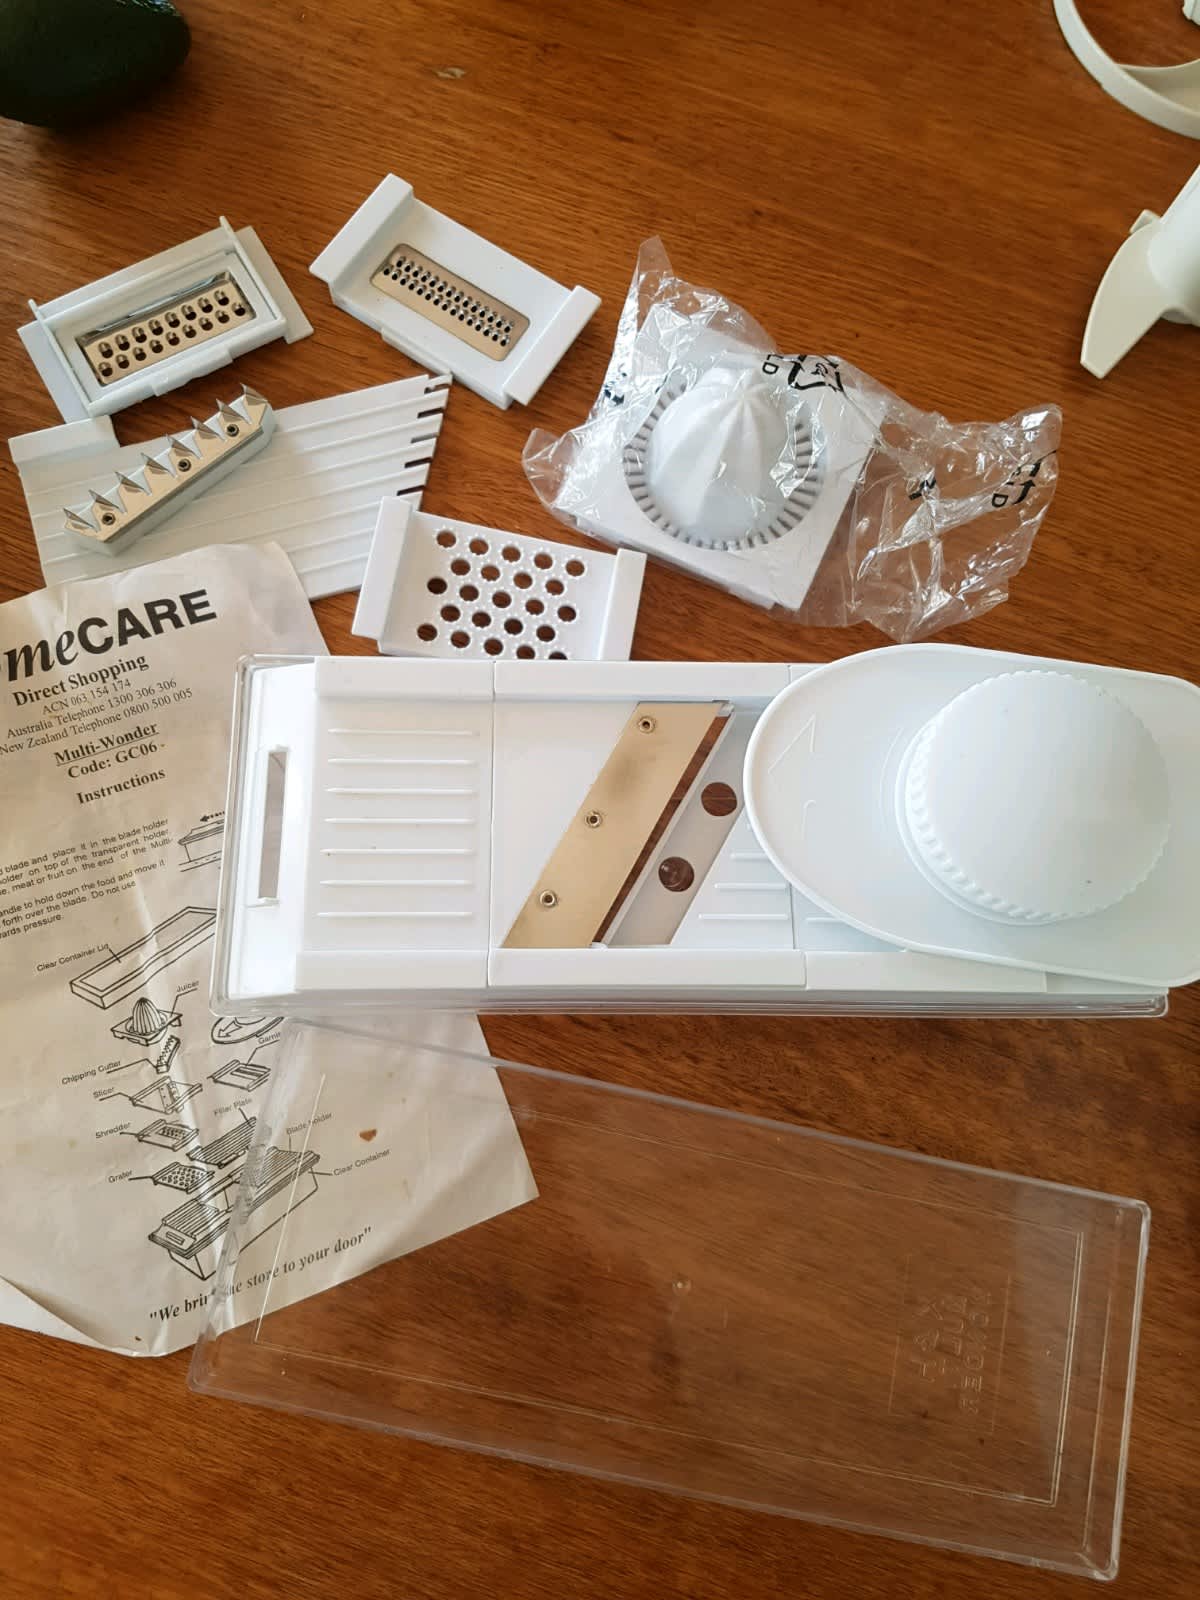 Ultimate Mandoline Slicer by The Pampered Chef New in box